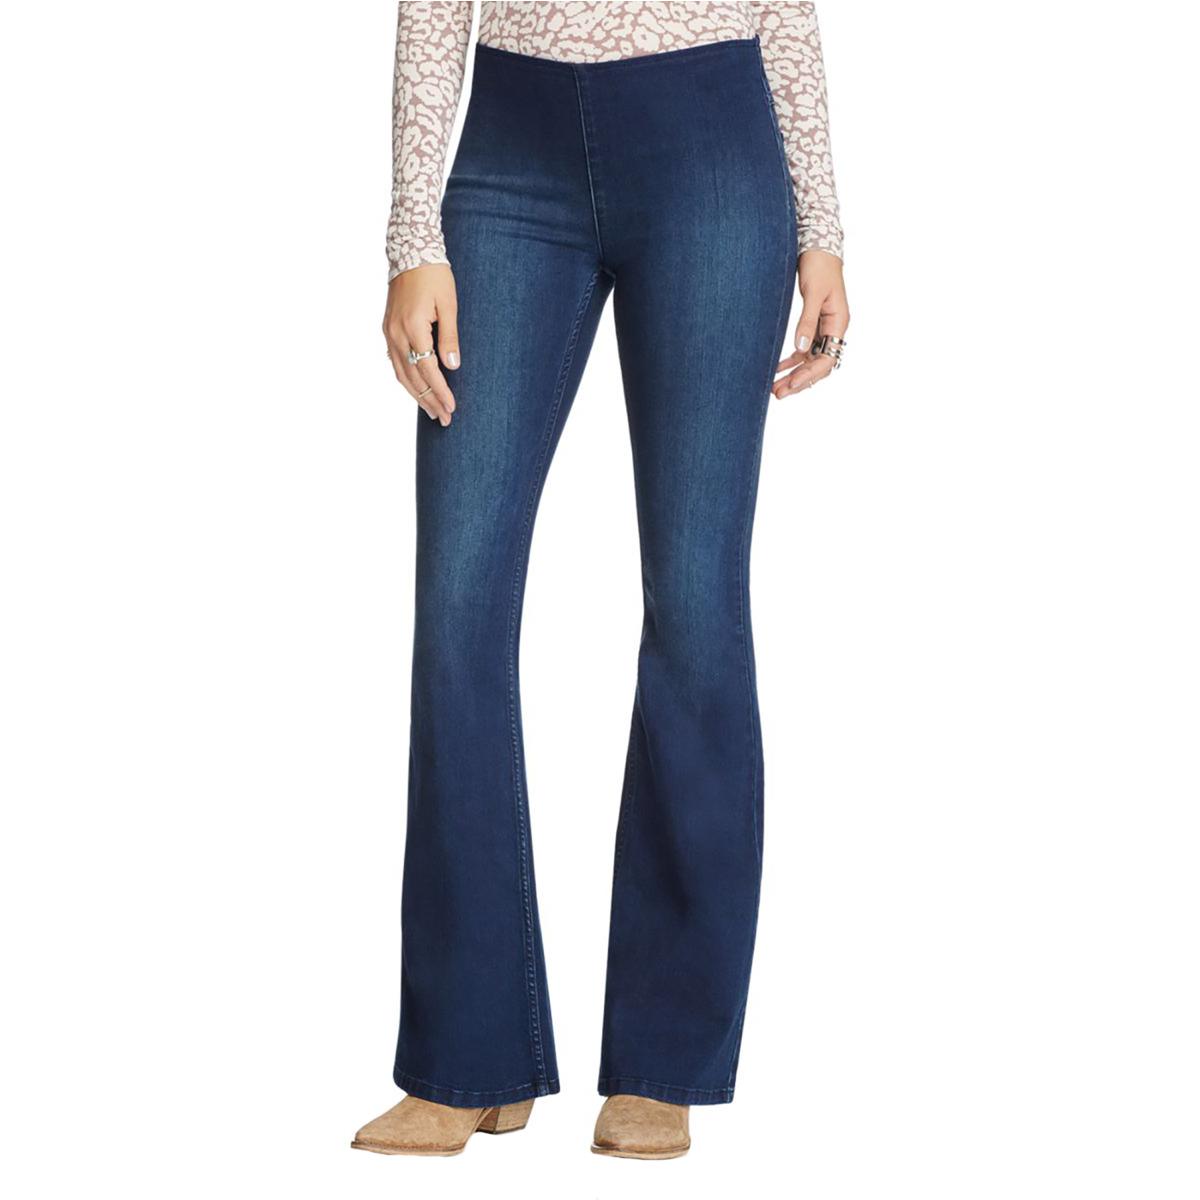 Free People Womens Blue Pull-On Flare Low Rise Jeans 24 BHFO 4604 | eBay